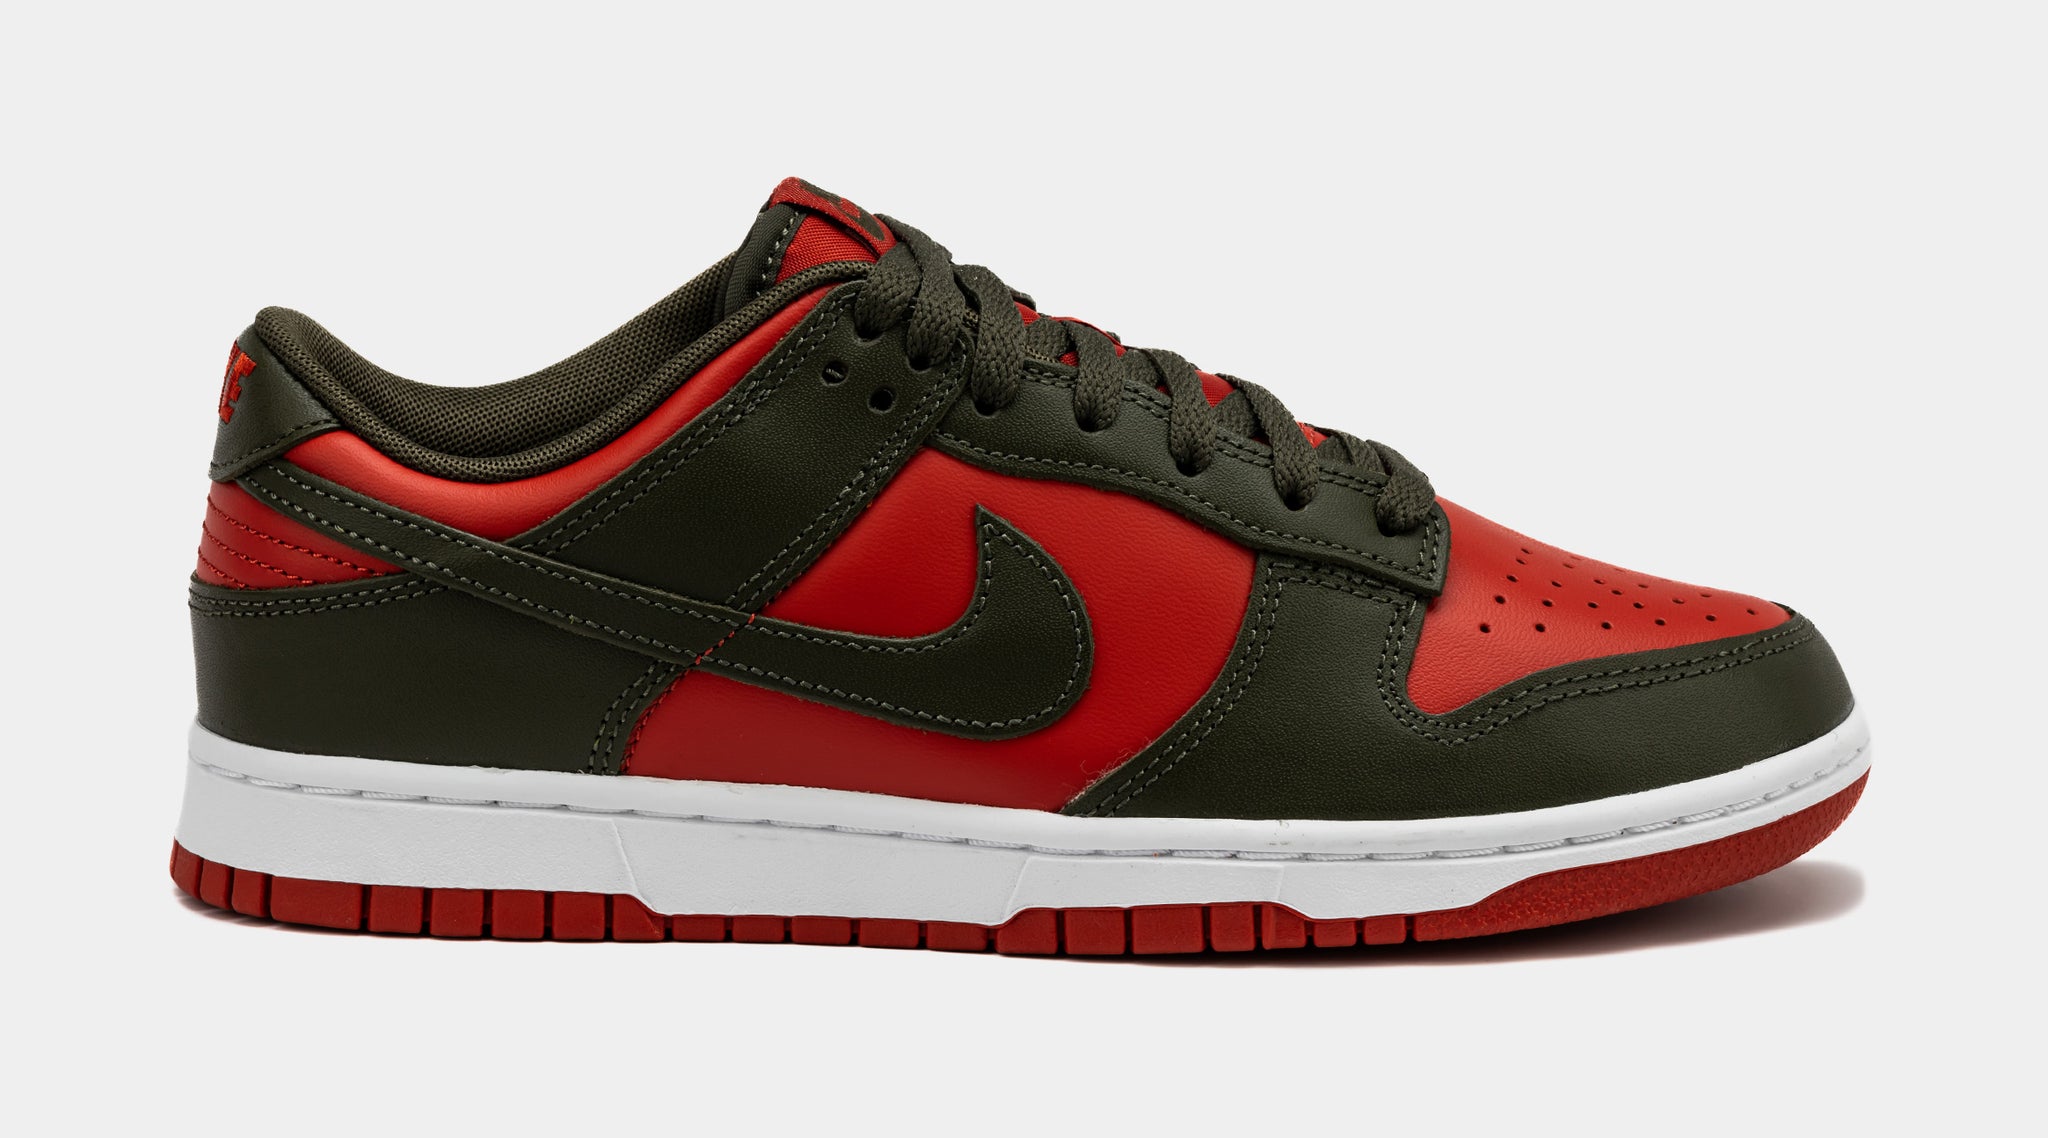 Dunk Low Mystic Red Mens Lifestyle Shoes (Mystic Red/Cargo Khaki/White)  Free Shipping